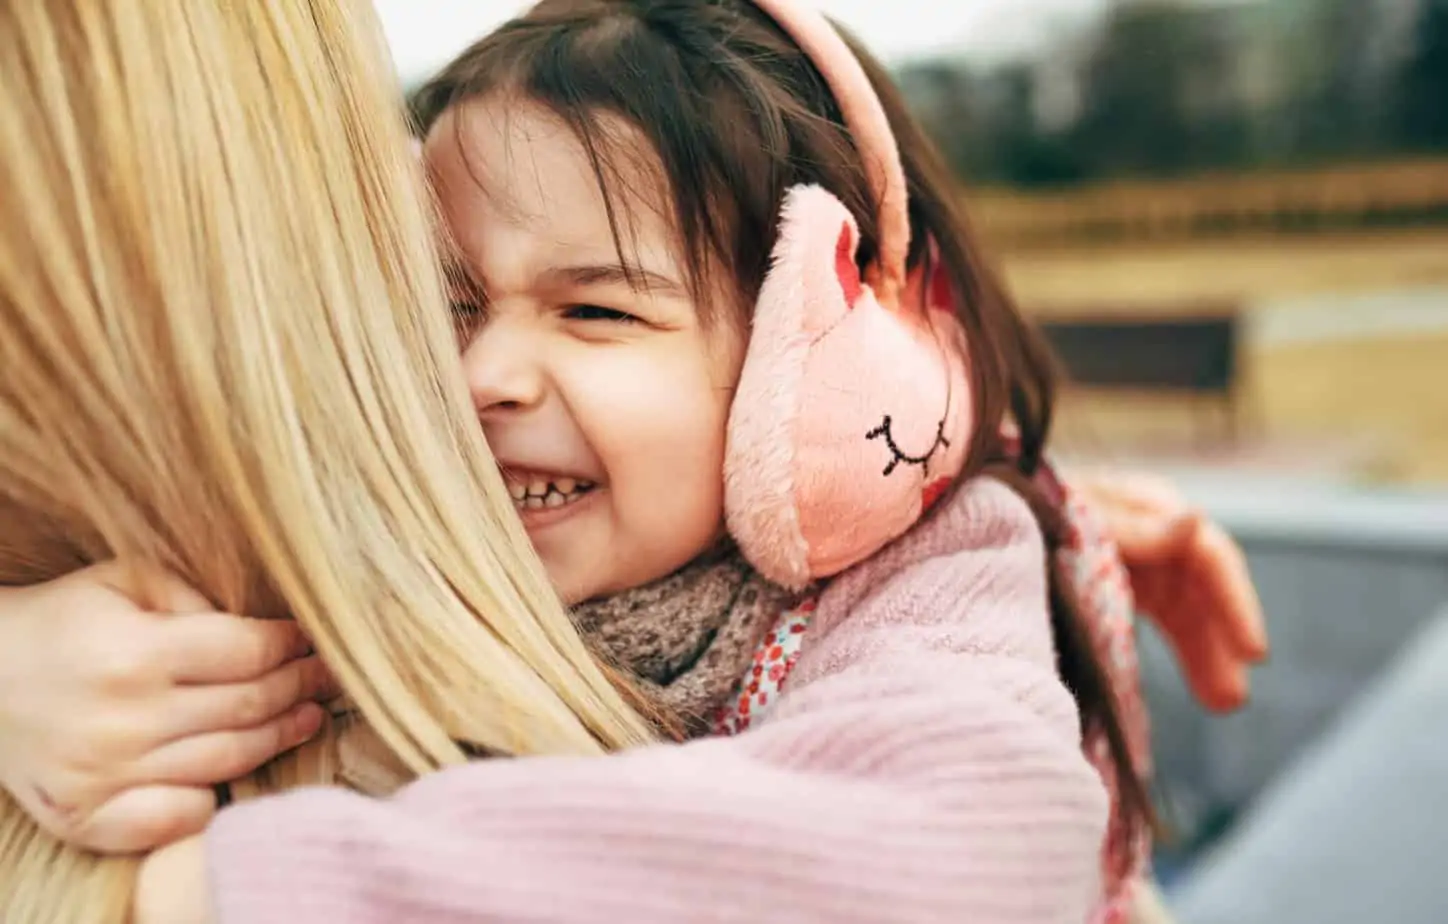 Get kids to listen and give you their attention, without raising your voice or yelling. Positive parenting tools to create a positive environment for connection, respect, and age-appropriate power. 